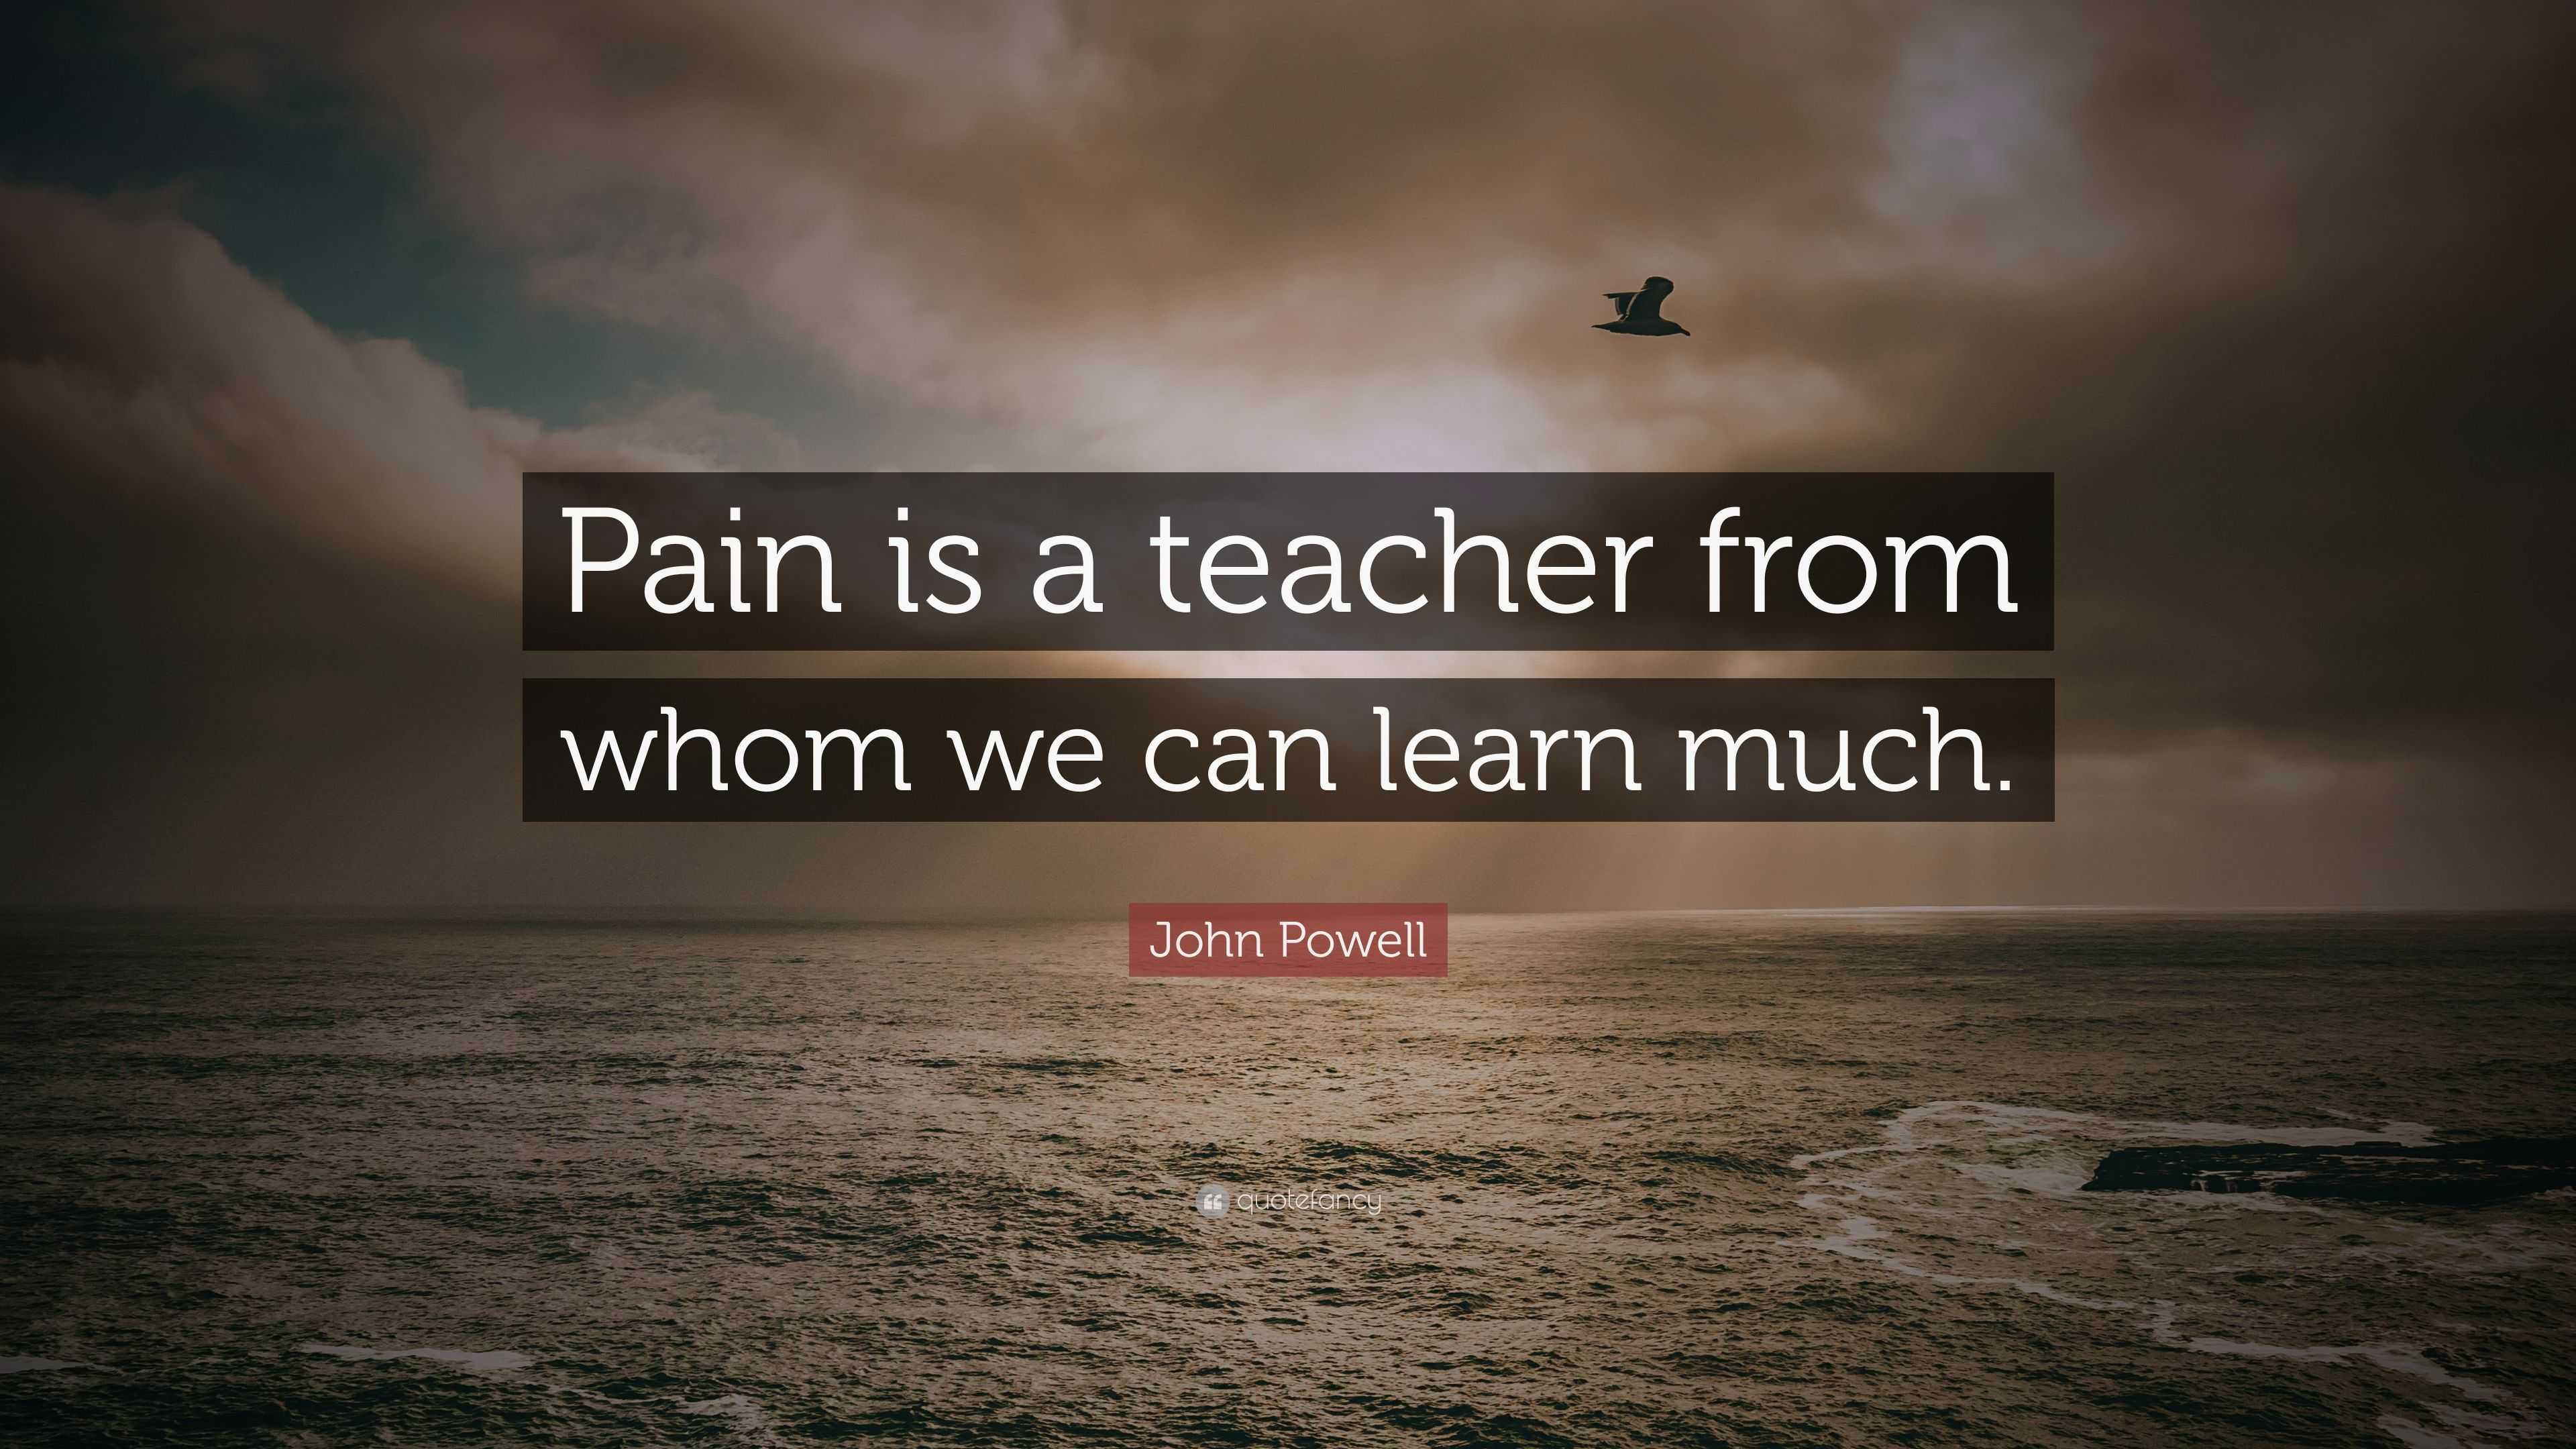 John Powell Quote: “Pain is a teacher from whom we can learn much.”